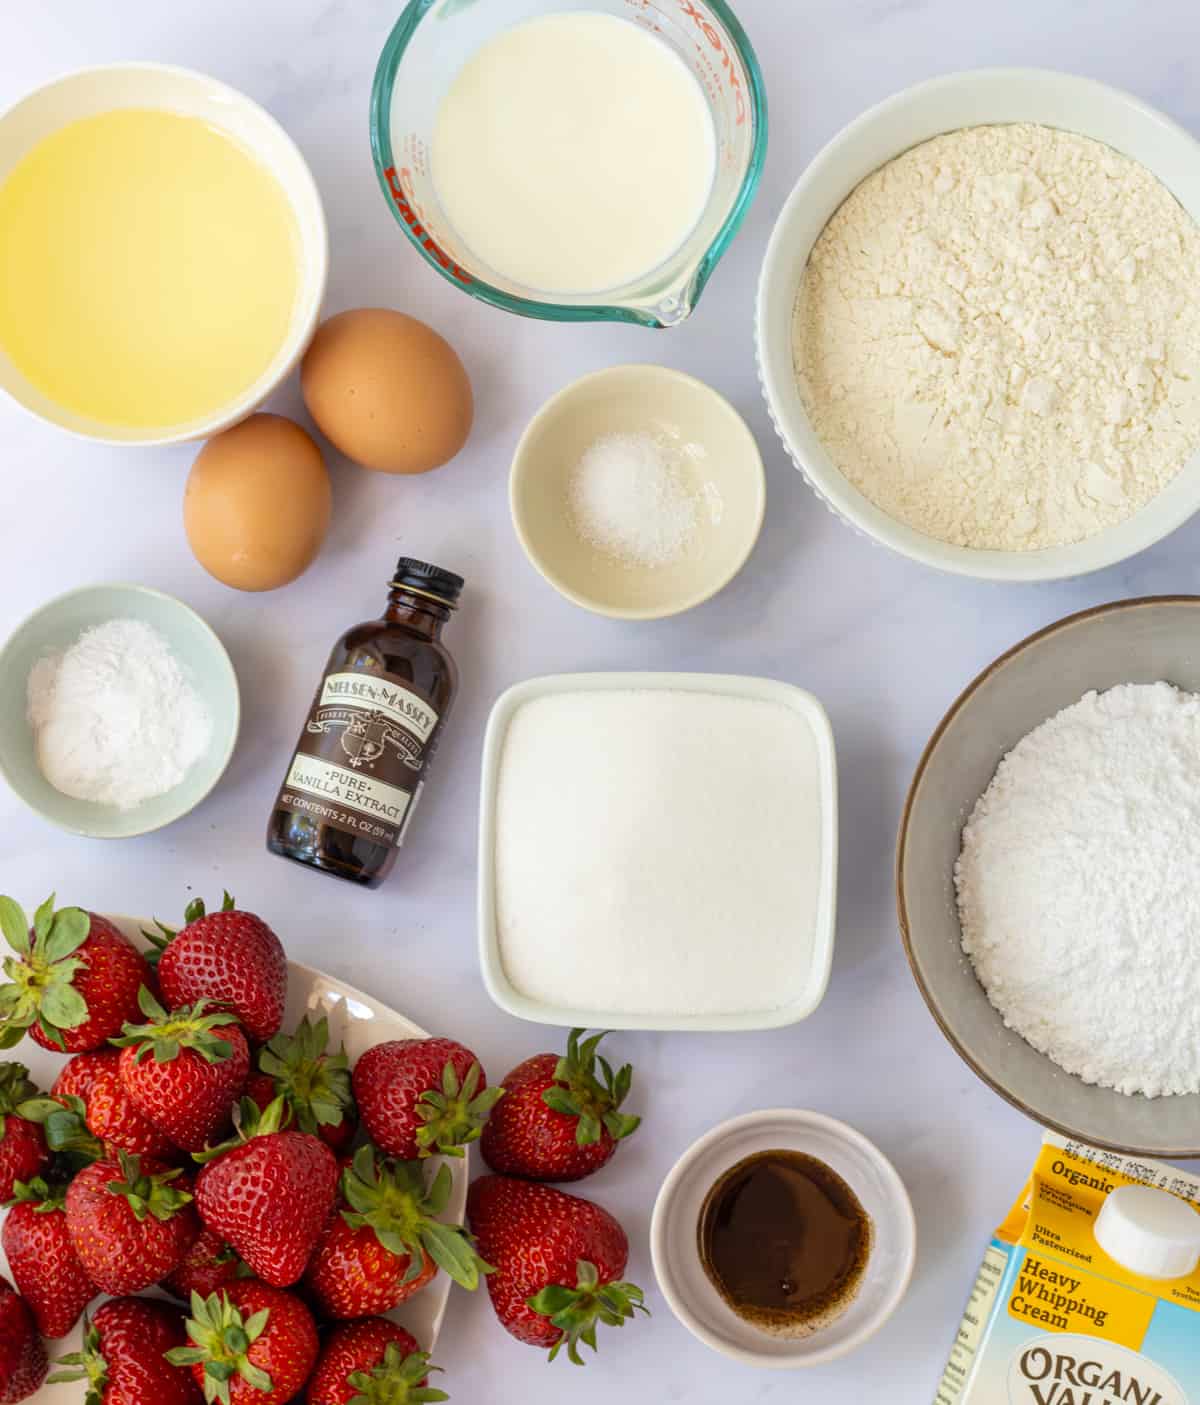 Ingredients for strawberry cake.